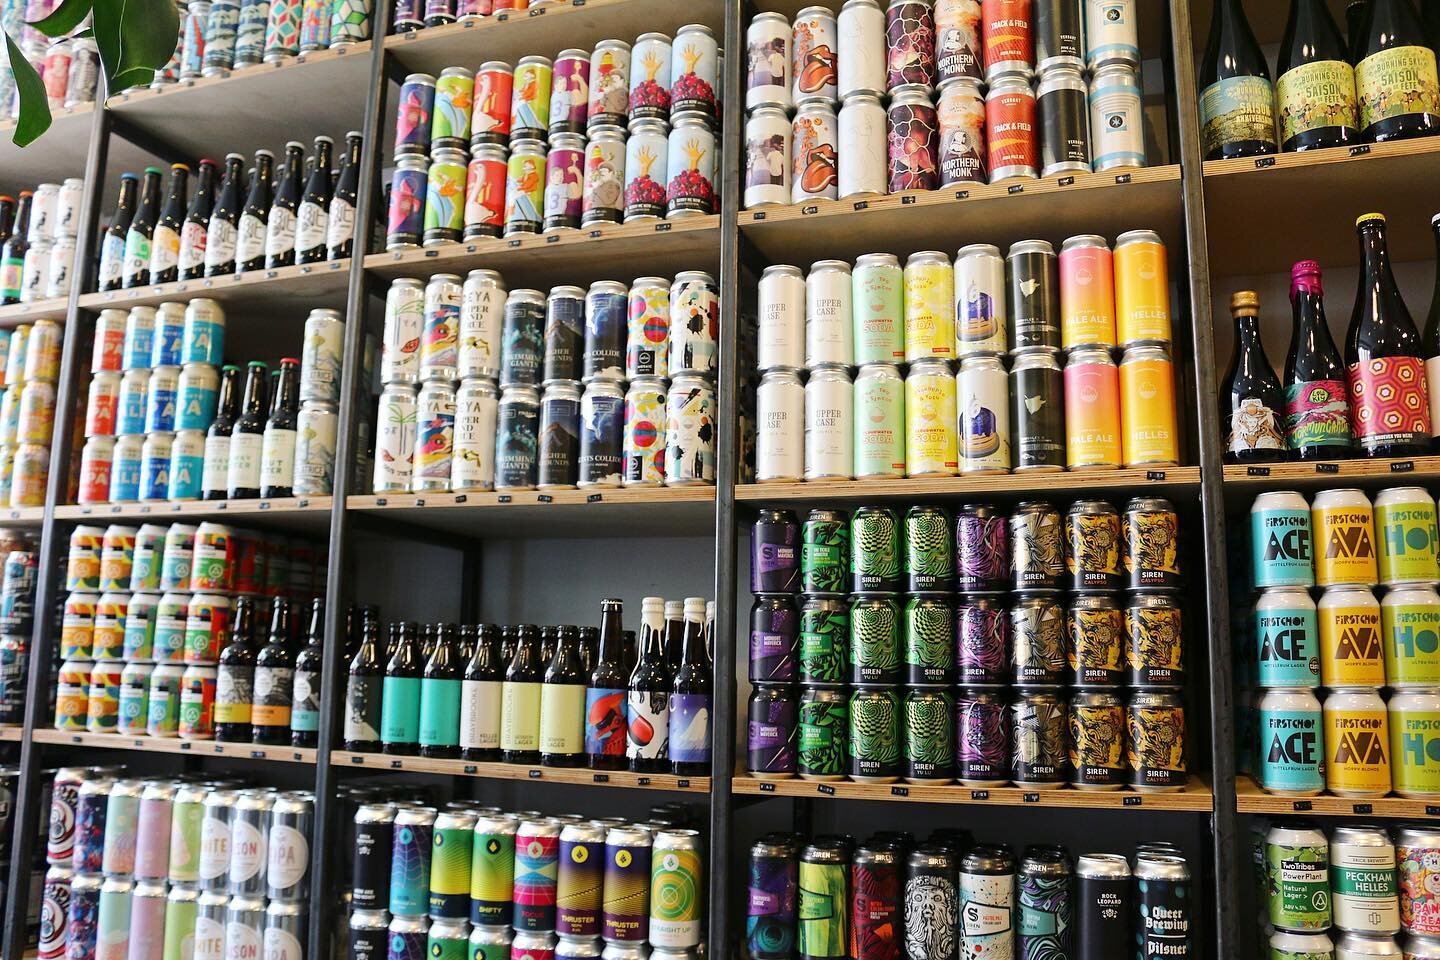 Spot What You&rsquo;re After? 👀 This week has seen a quite frankly obscene amount of good beer drop... From Cloudwater&rsquo;s B&rsquo;day beers to fresh Time &amp; Tide, a mega Verdant restock or Siren newbies it definitely reads like a who&rsquo;s